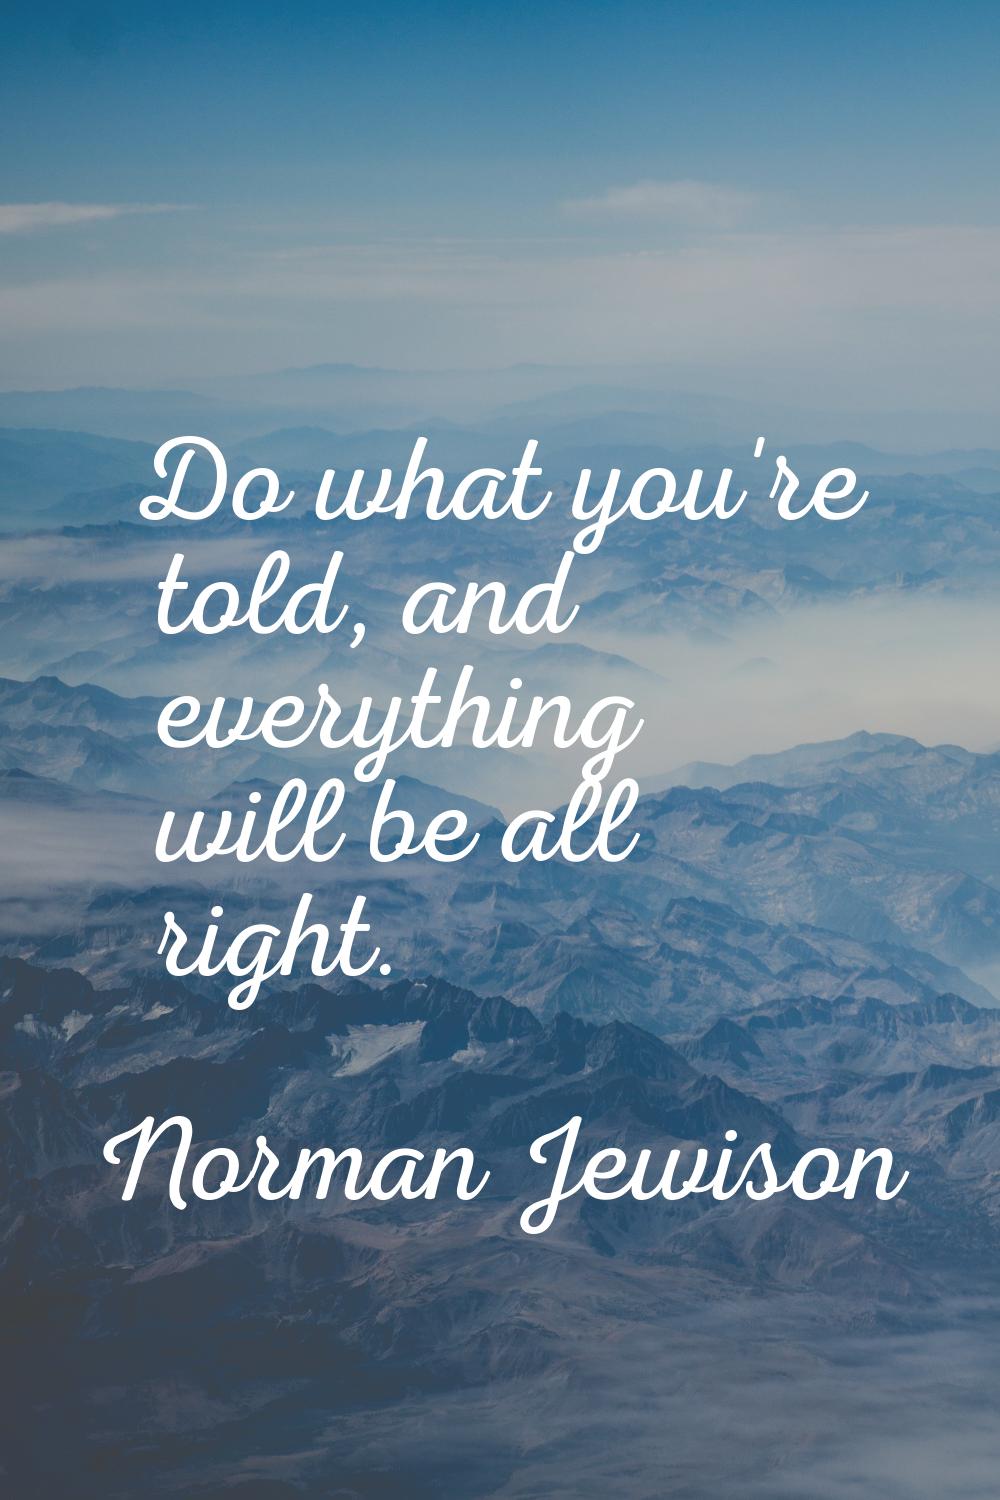 Do what you're told, and everything will be all right.